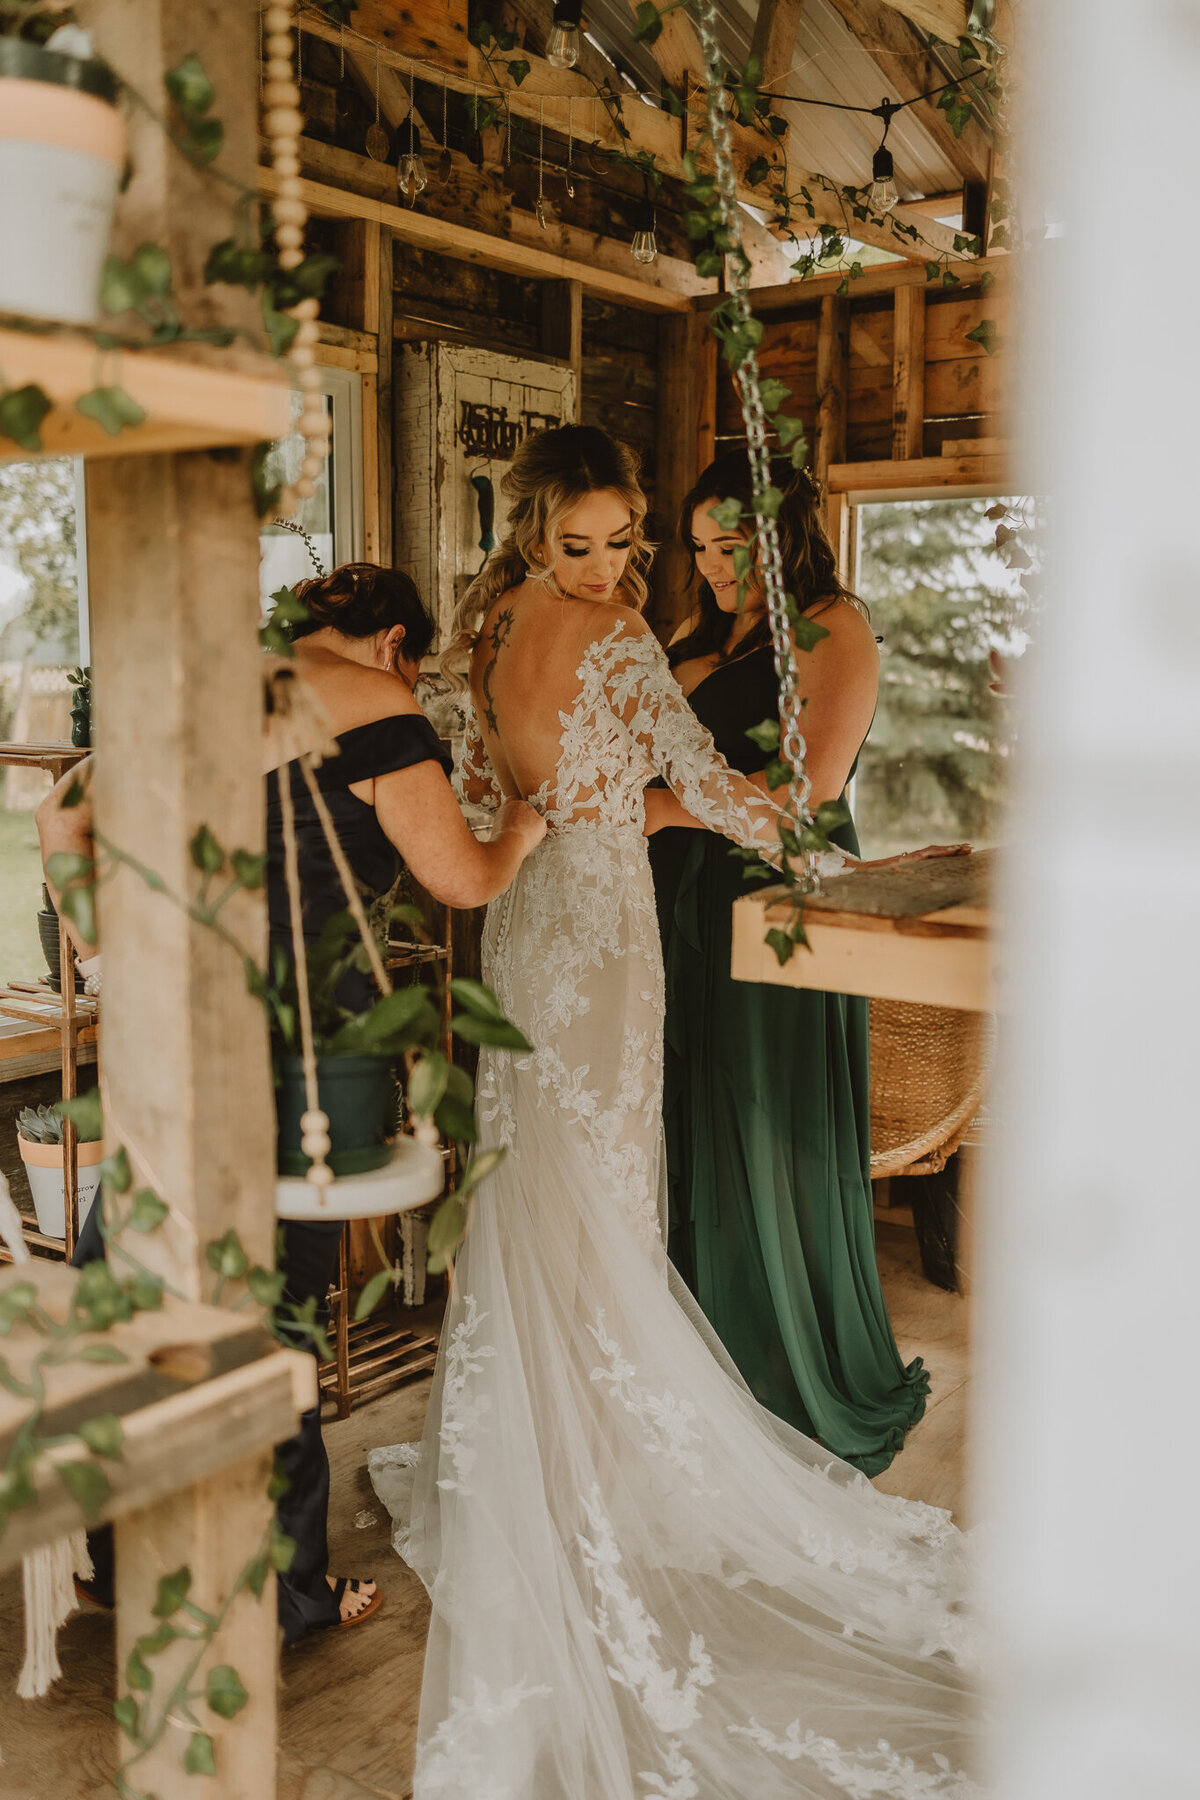 Bride getting done up by bridesmaid in Edmonton, AB